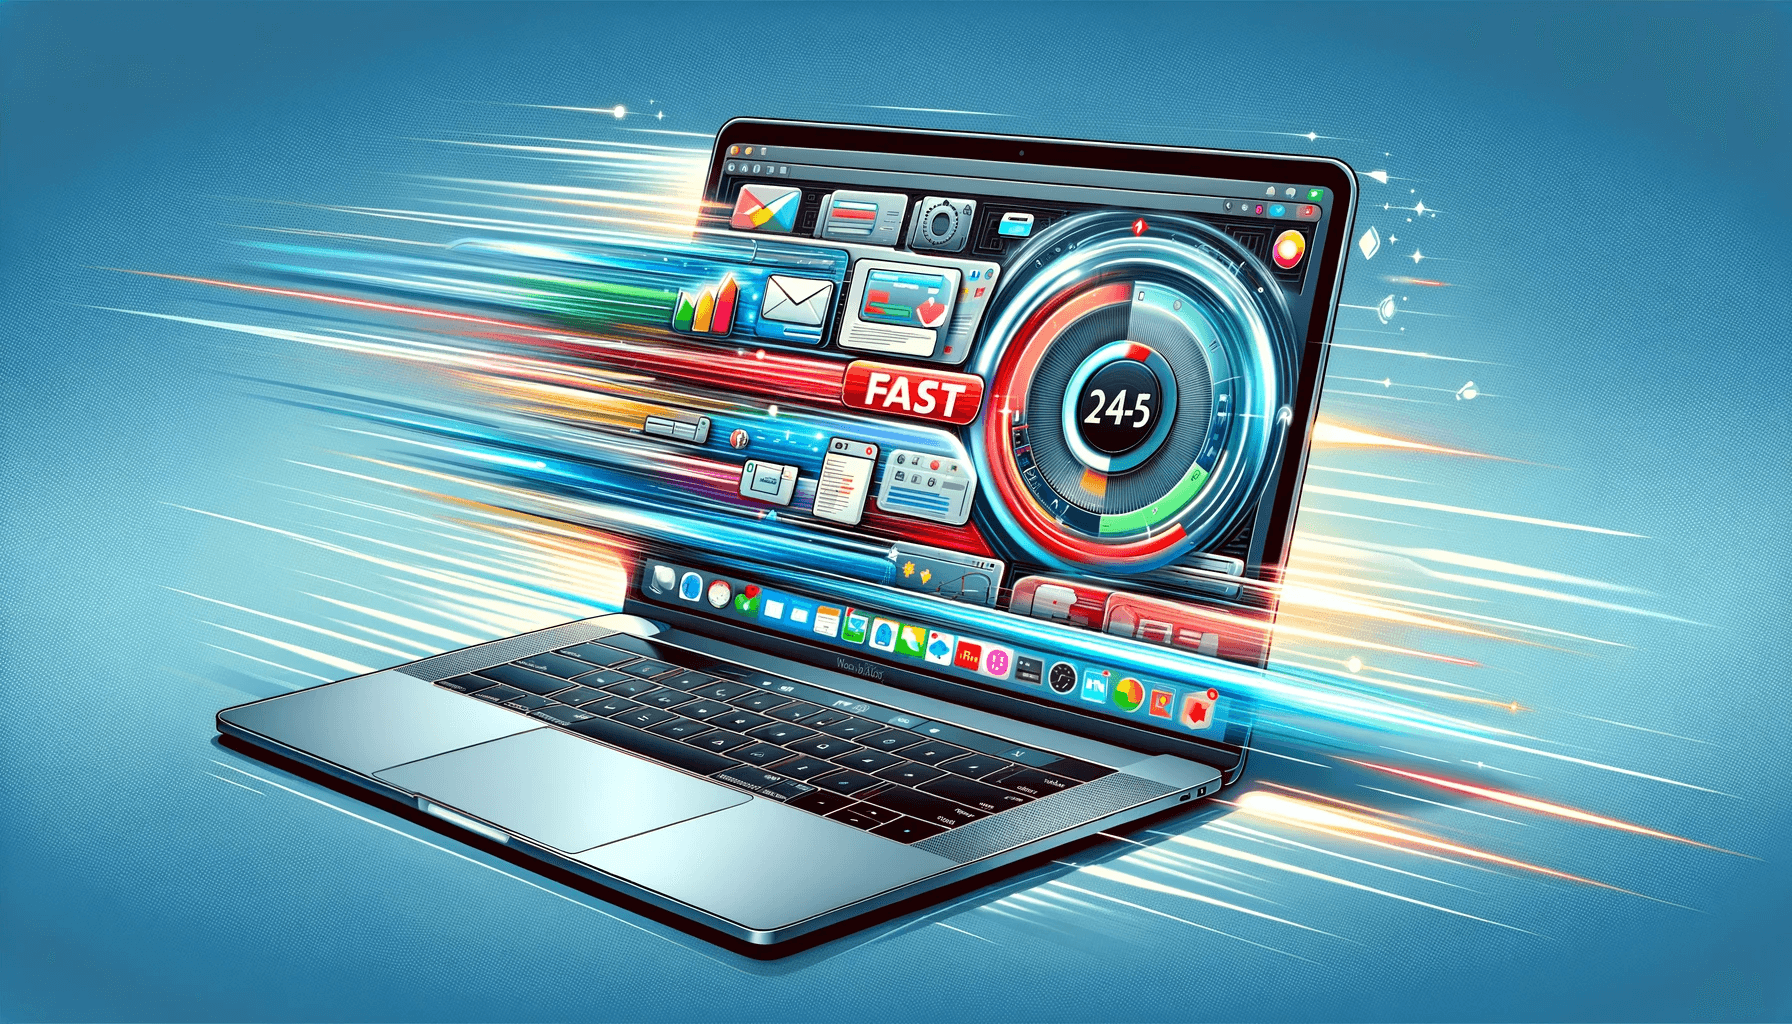 DALL·E 2023 12 21 17.20.56 A digital illustration of a MacBook working fast. The MacBook is open displaying its high resolution screen with dynamic and swift visual elements th